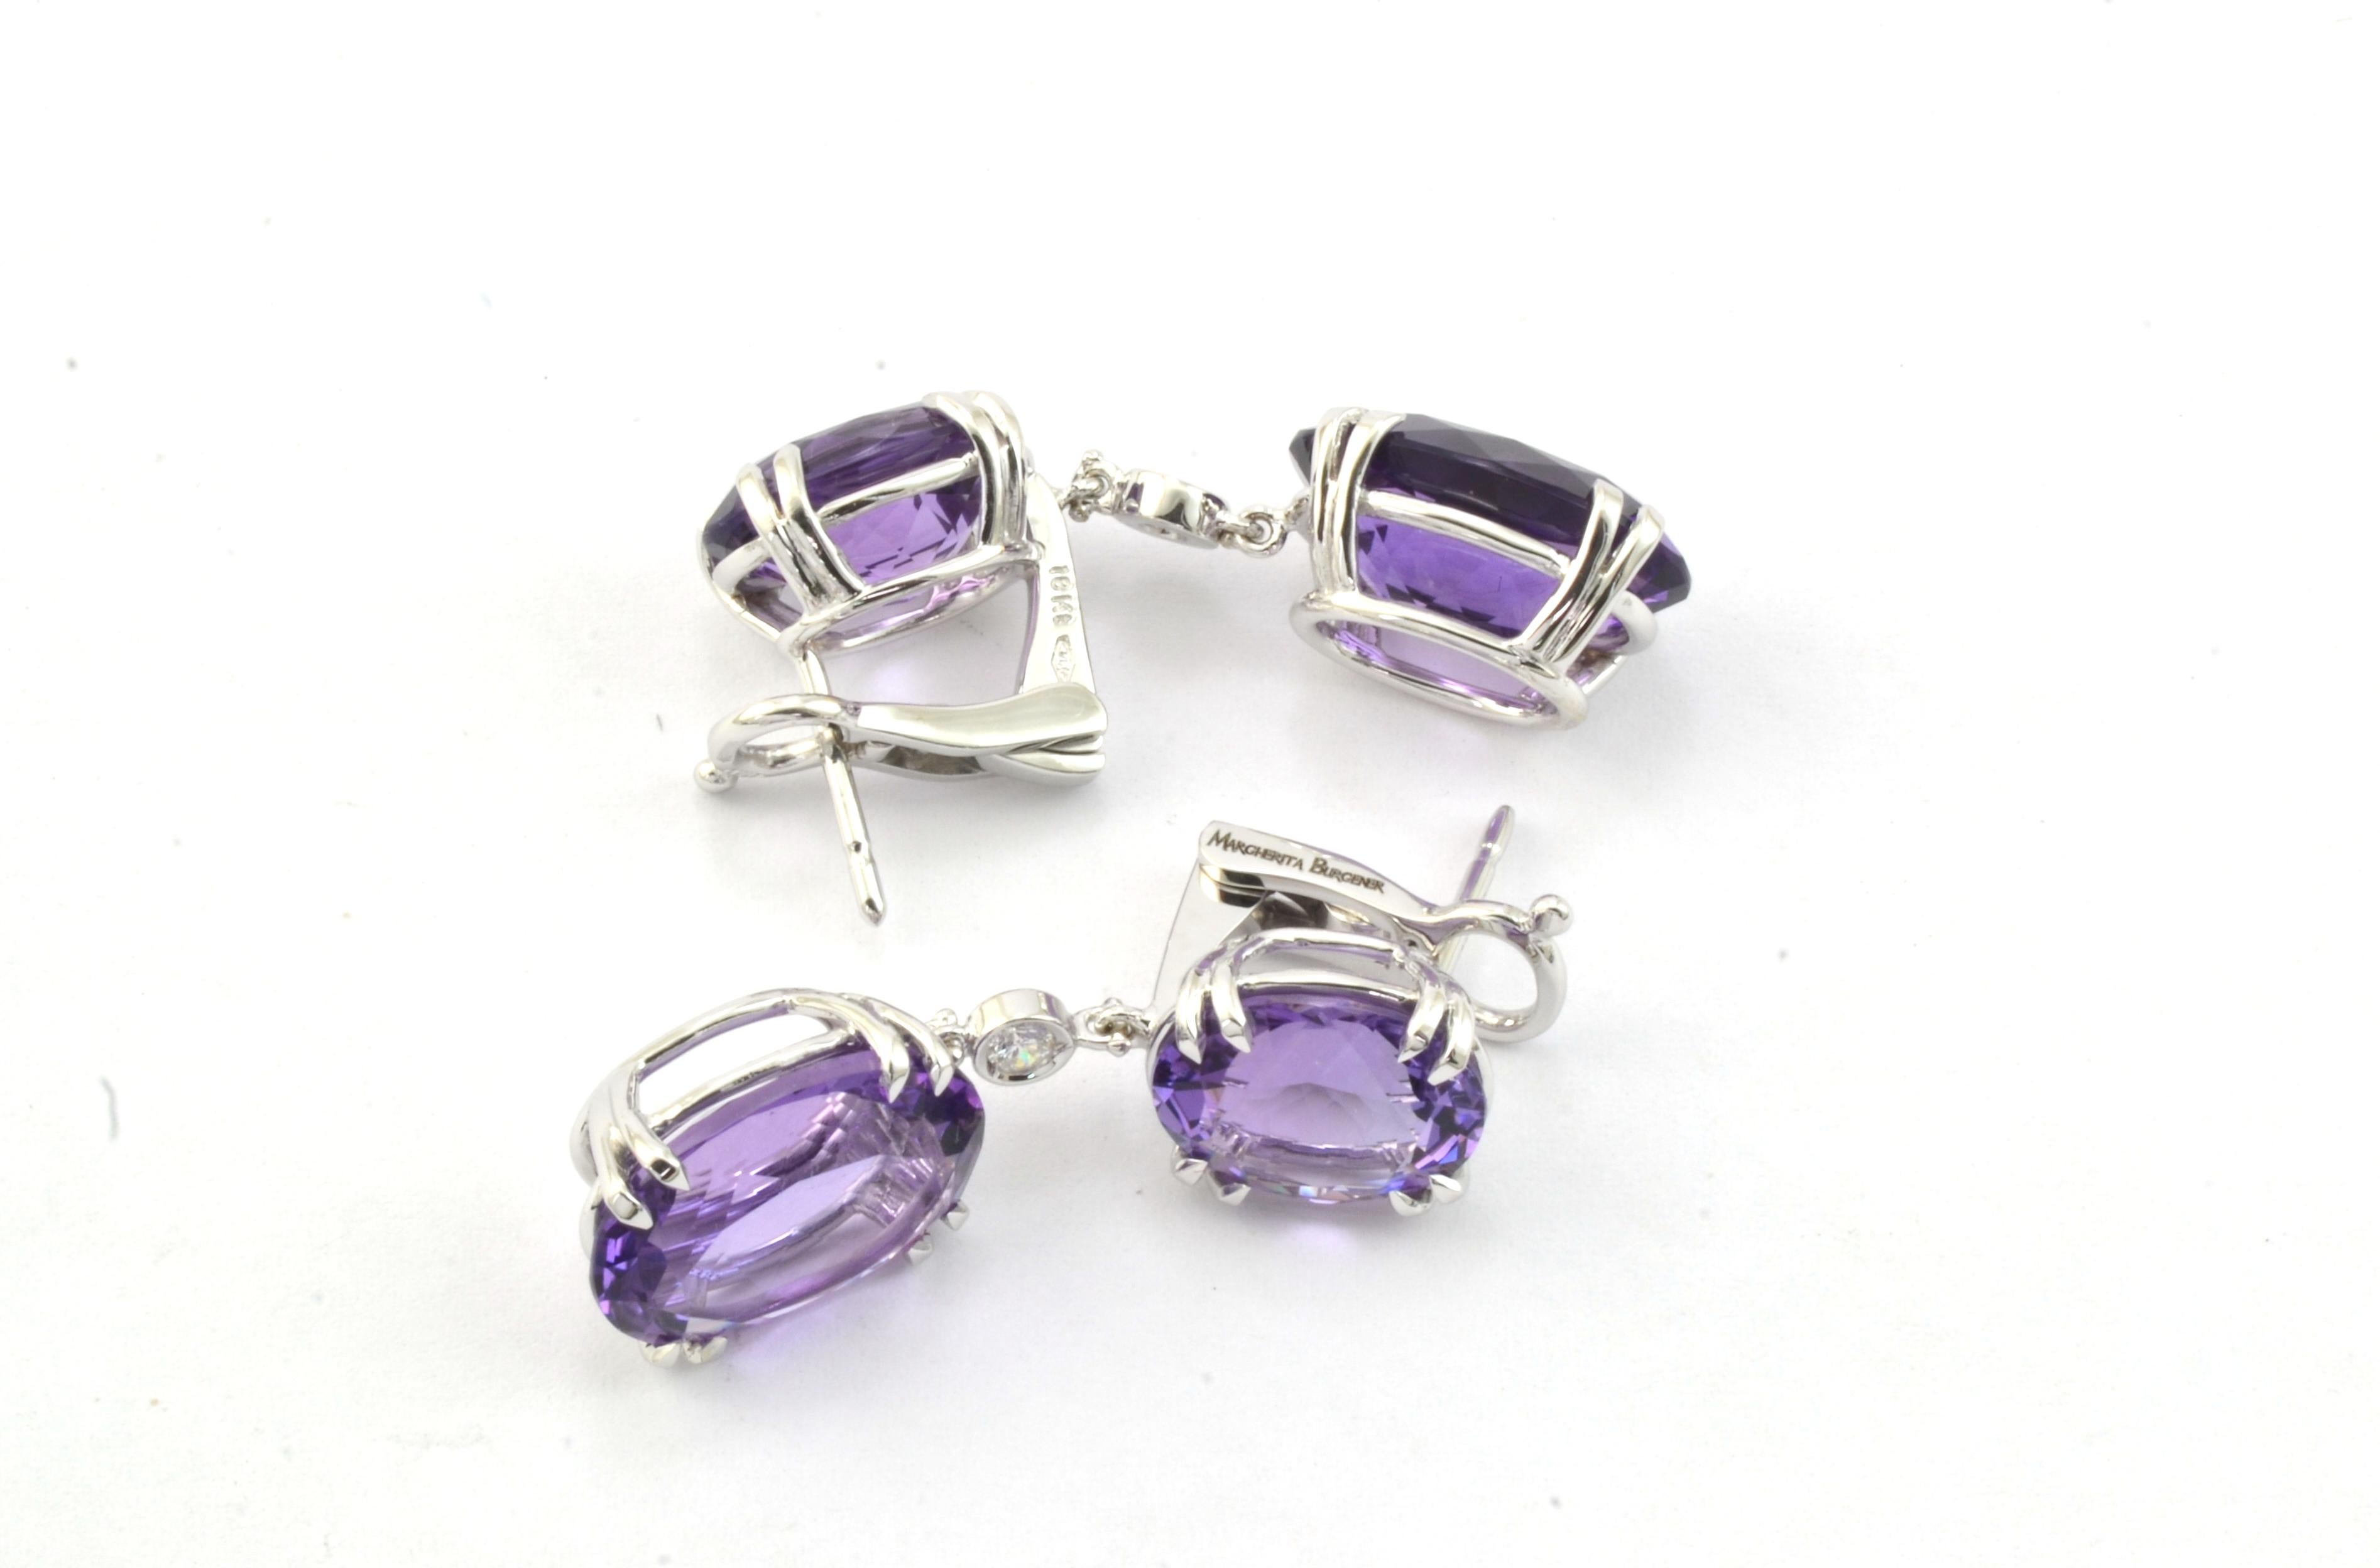 Oval Cut Amethysts Diamond 18 KT White Gold Made in Italy Earrings